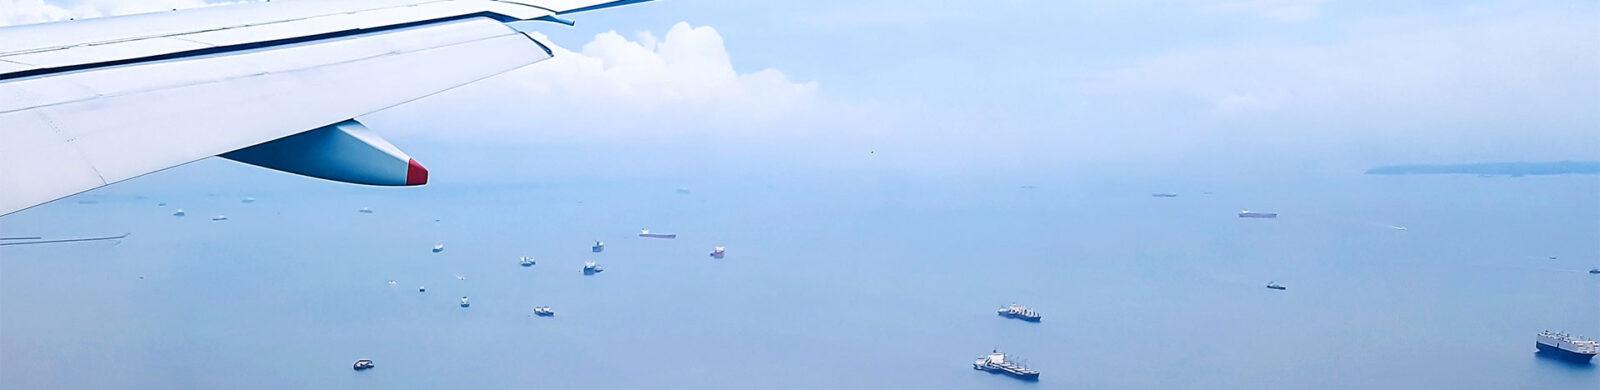 Airplane wing over an ocean full of ships